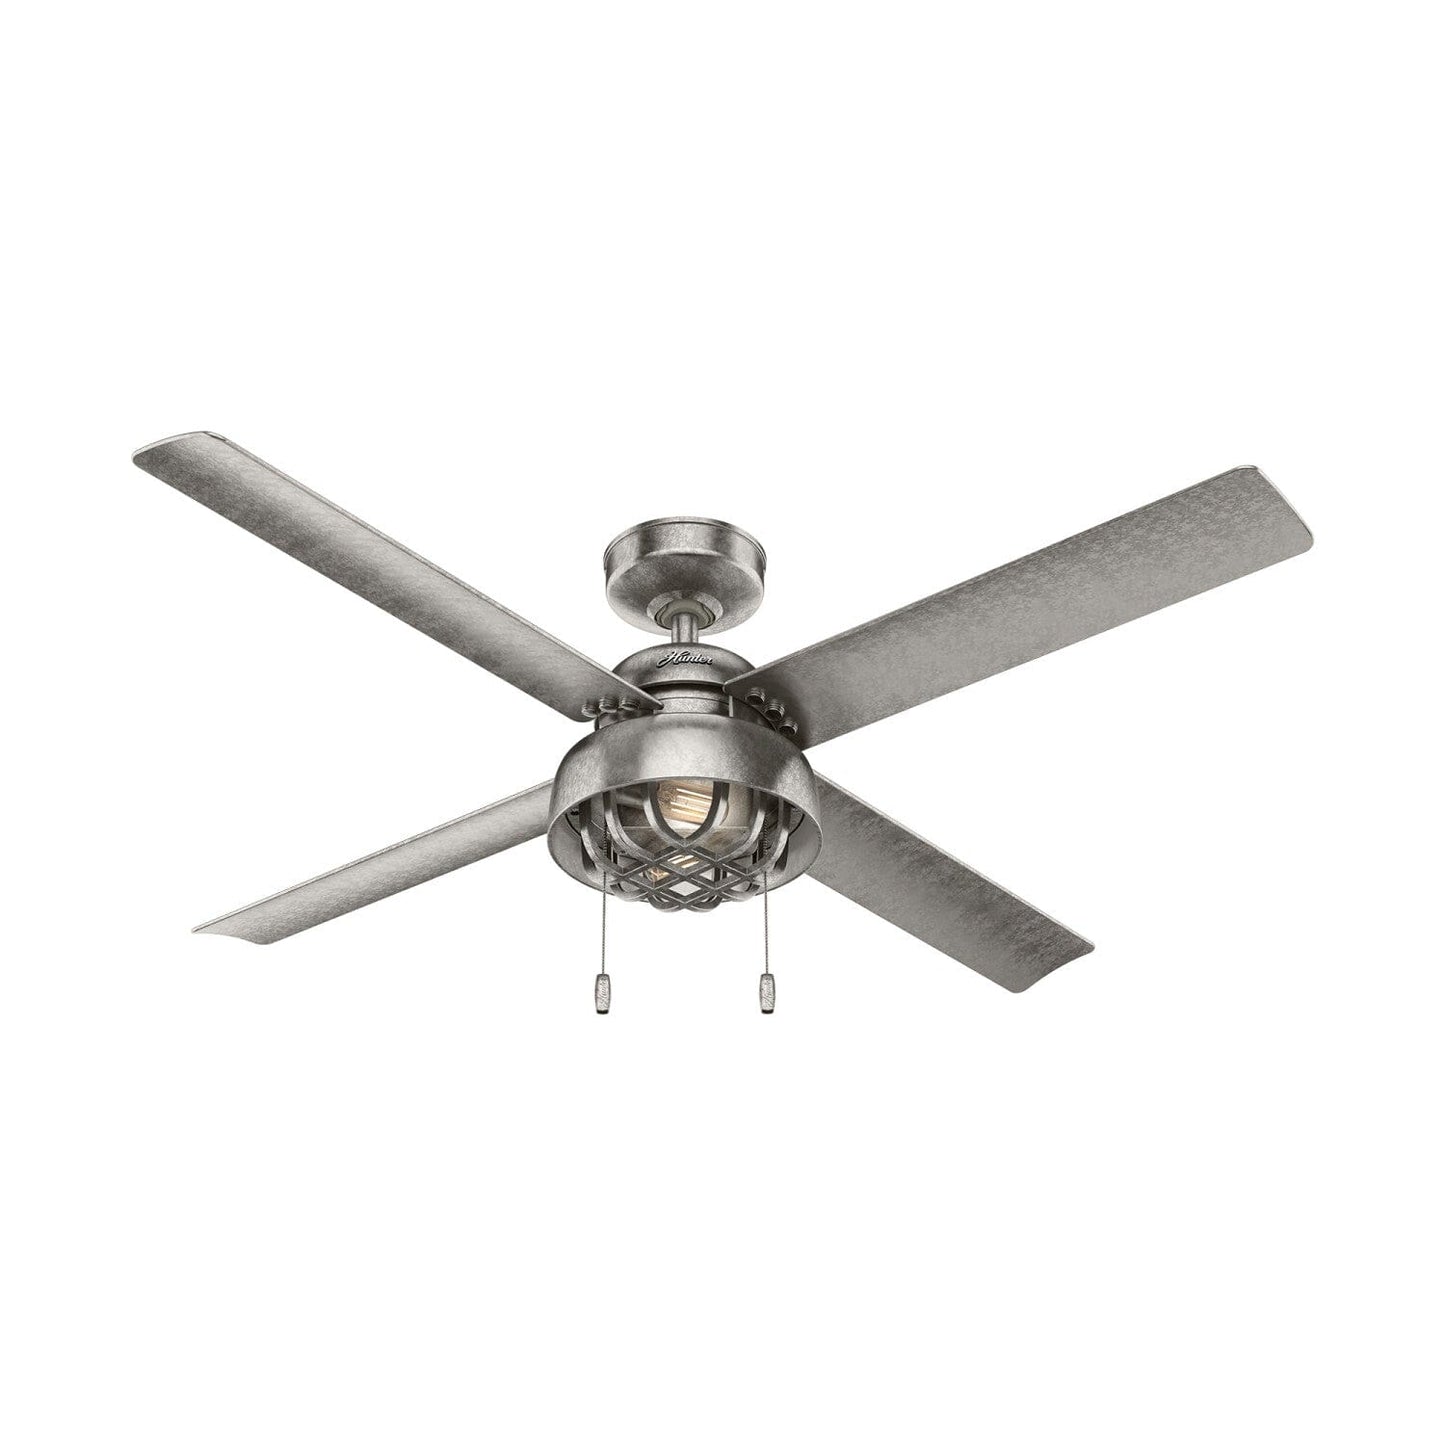 Spring Mill Outdoor with LED Light 52 inch Ceiling Fans Hunter Painted Galvanized - Painted Galvanized 